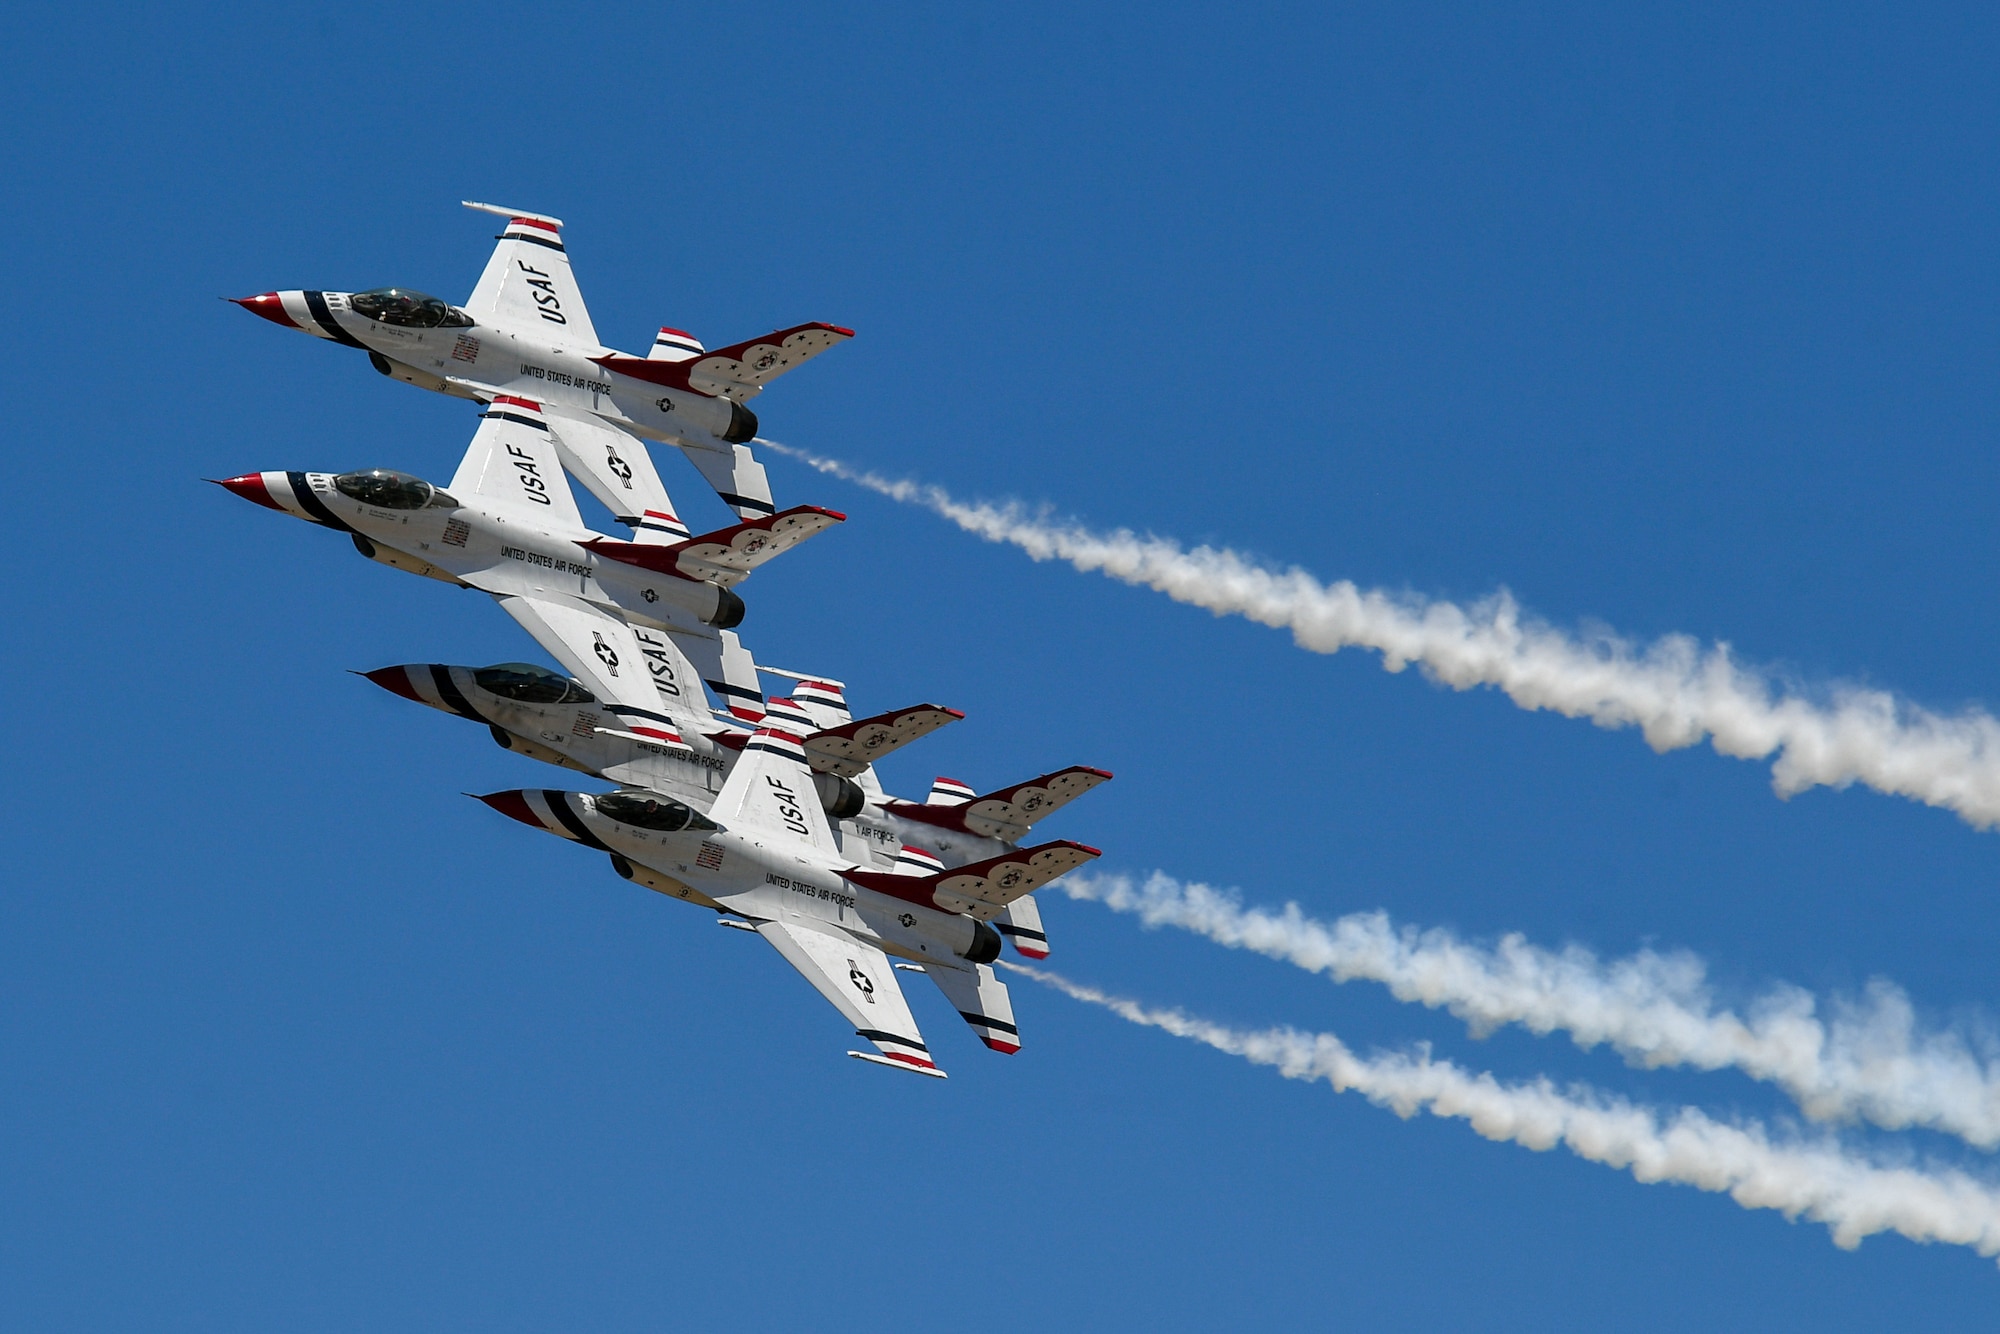 Four thunderbird aircraft fly in formation